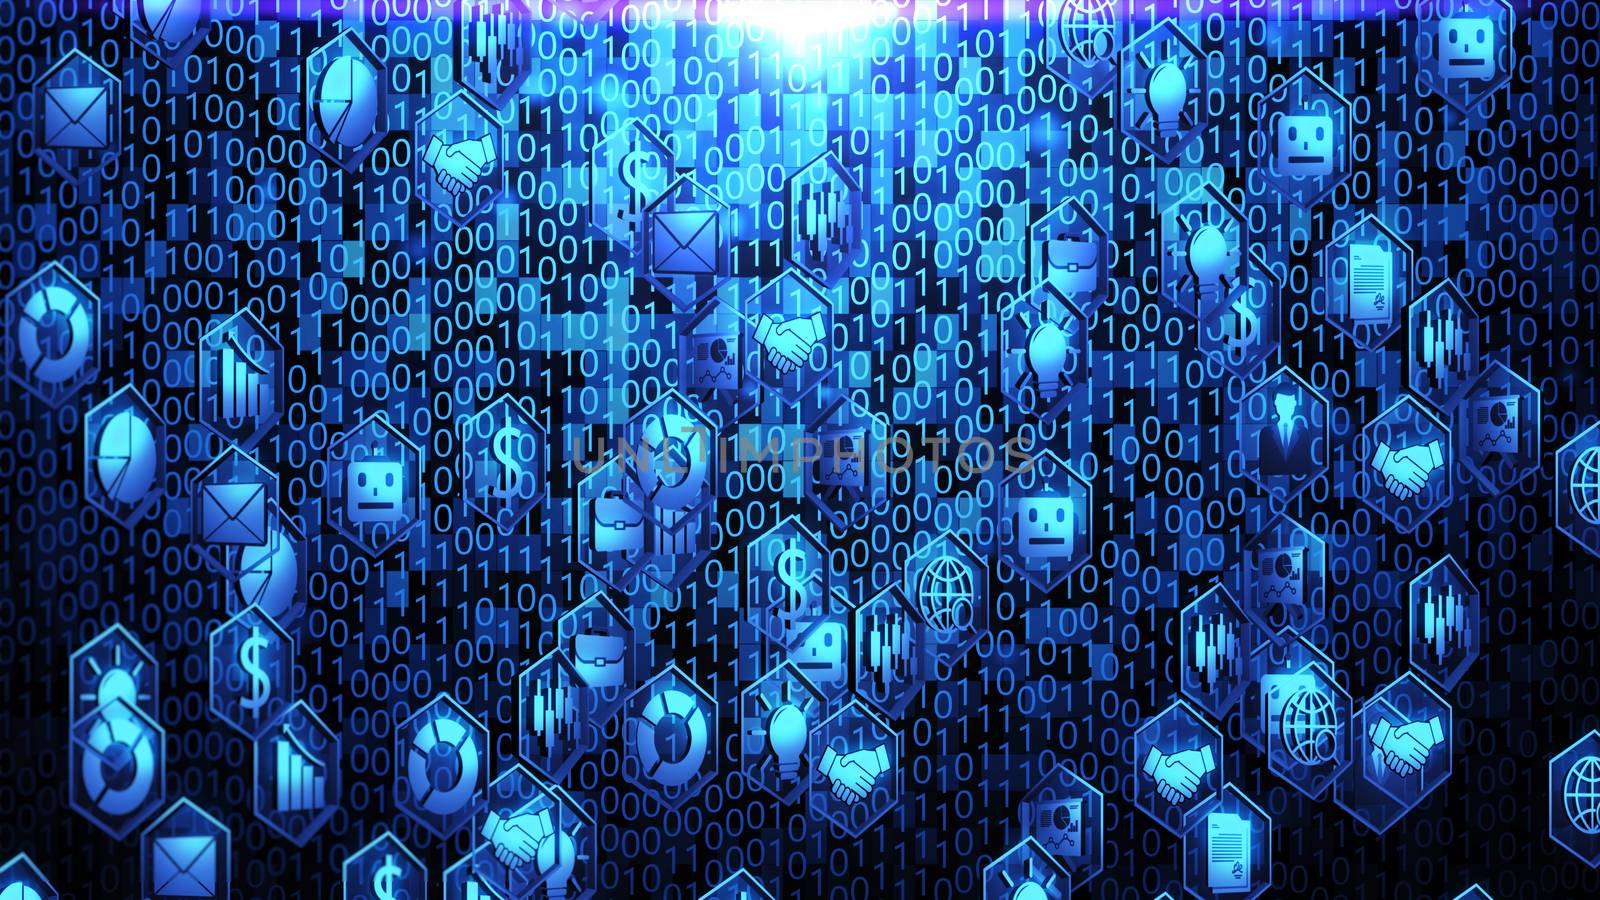 8K 3D Business and Technology Icons Spin in Hexagon Border and Hovering on The Random Binary Code Background with Blue Lighting ver. 1 (full view)